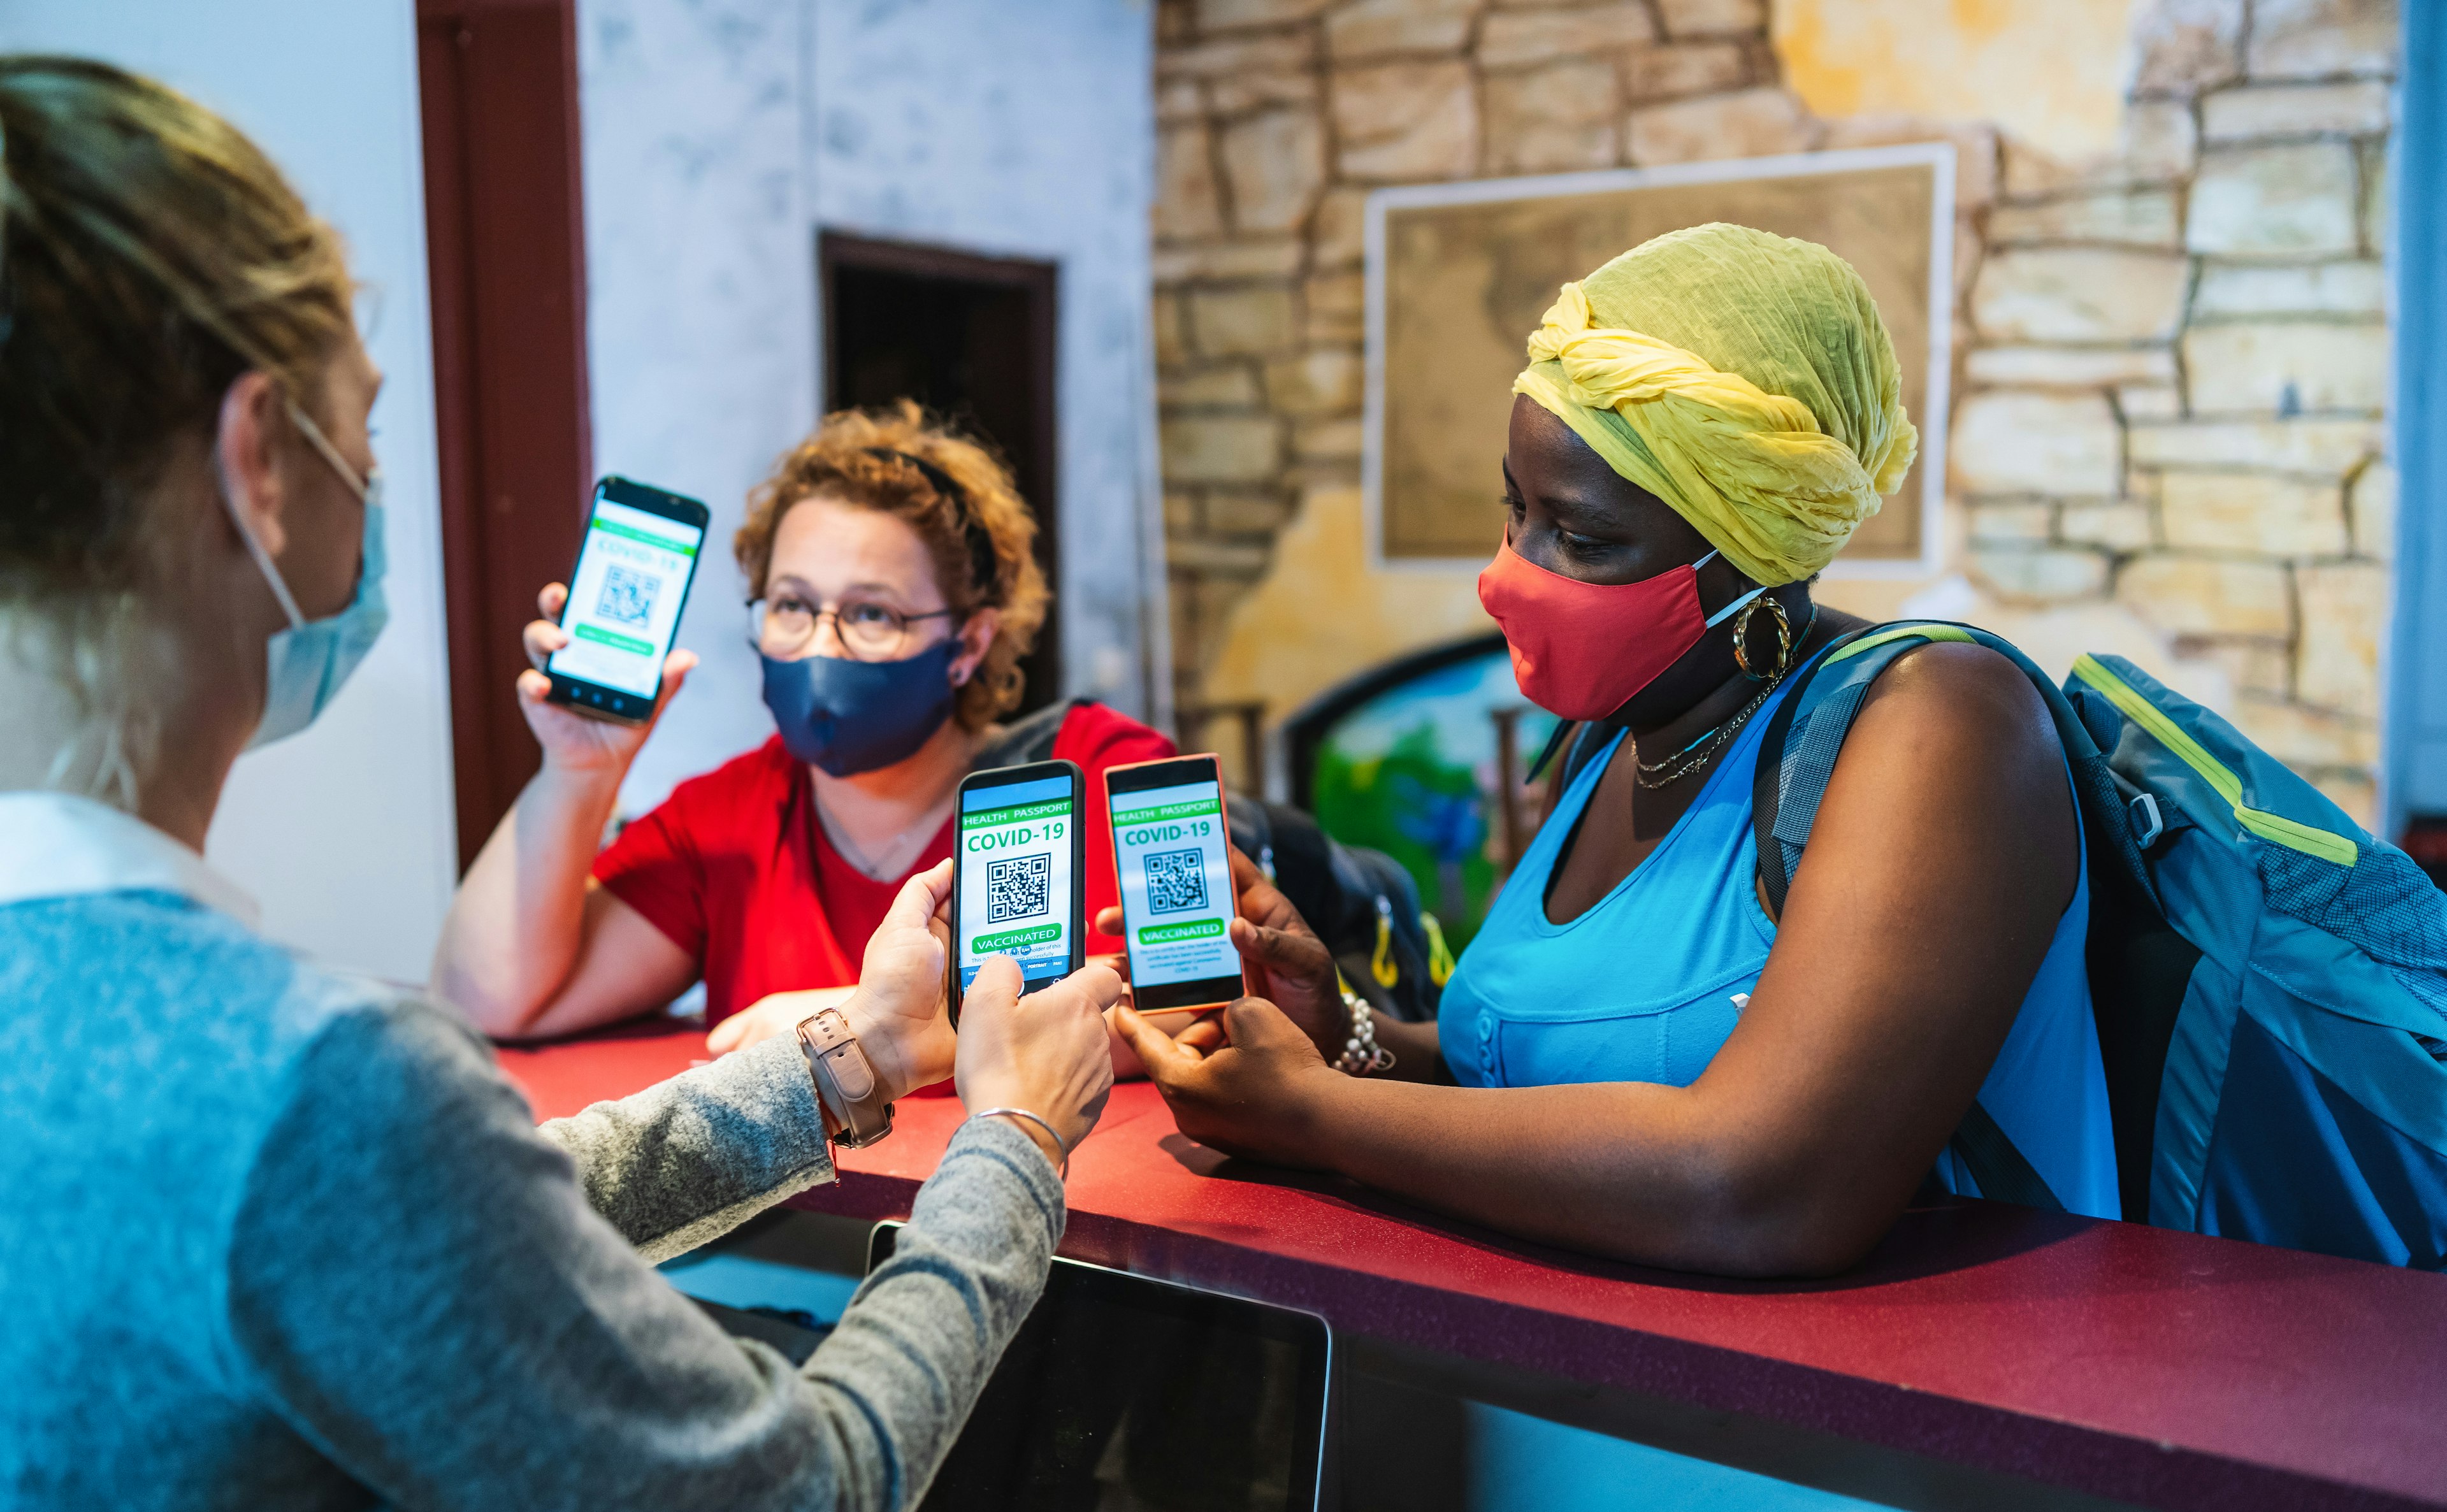 Friends with backpacks and wearing protective face mask arriving to a city hostel, welcomed by female receptionist who checks their digital certificate of Covid-19 vaccination passport